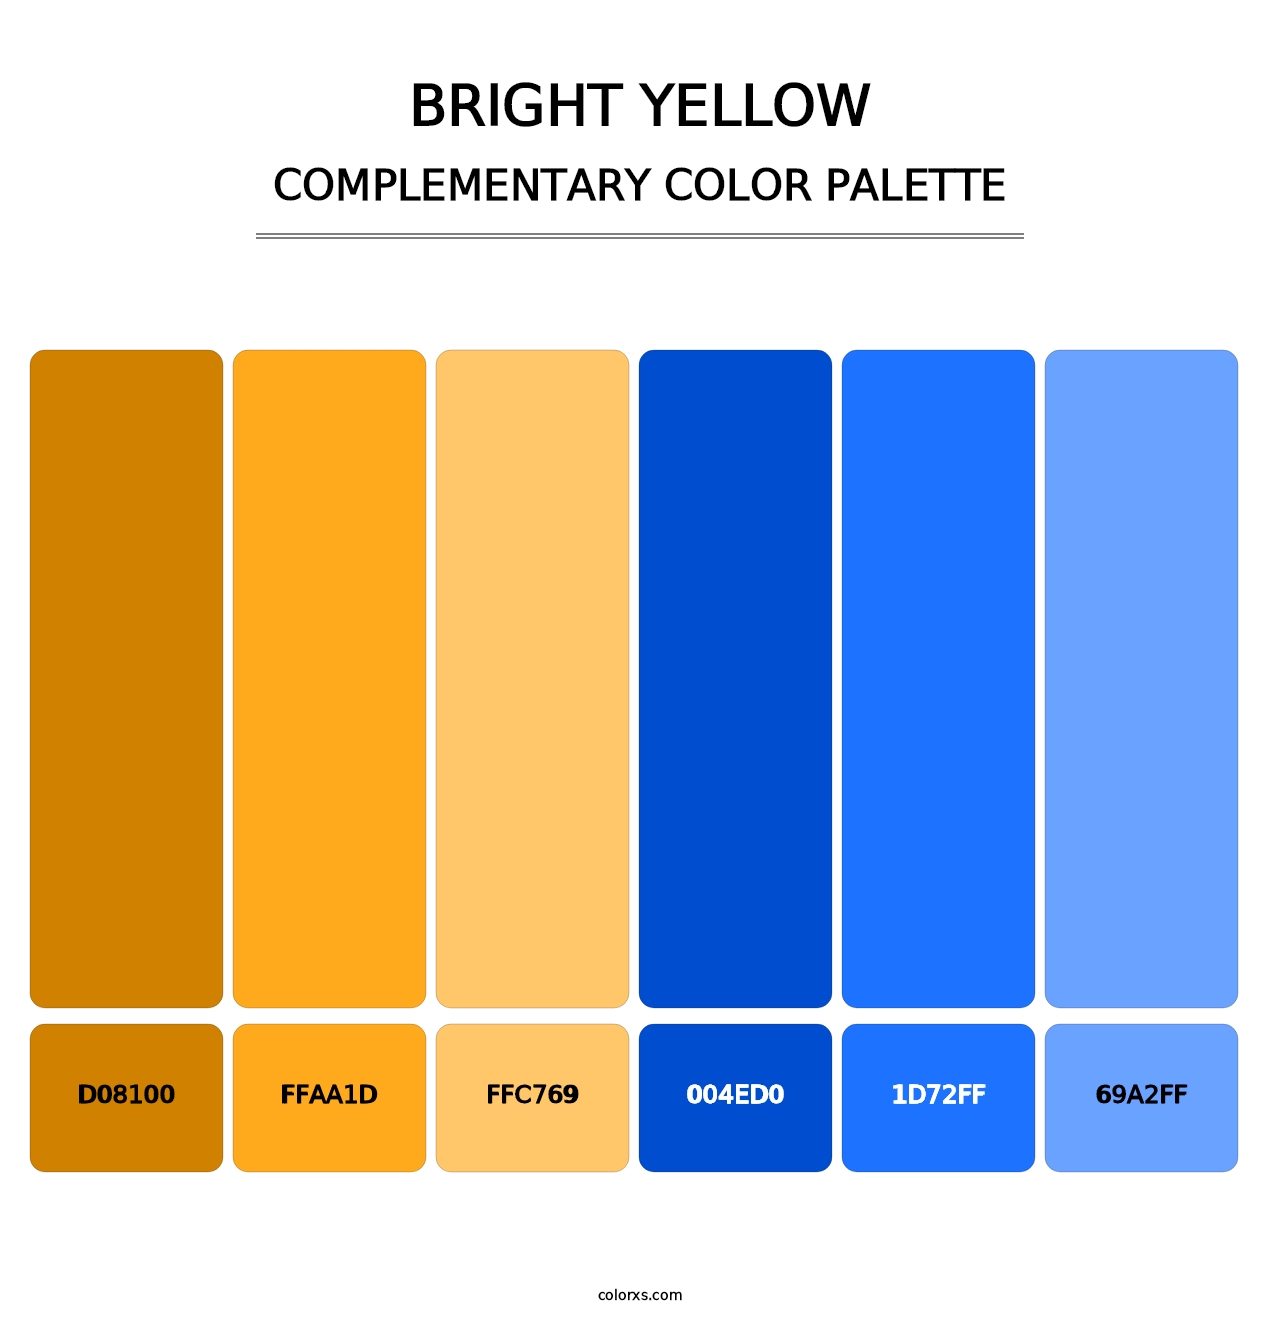 Bright Yellow - Complementary Color Palette